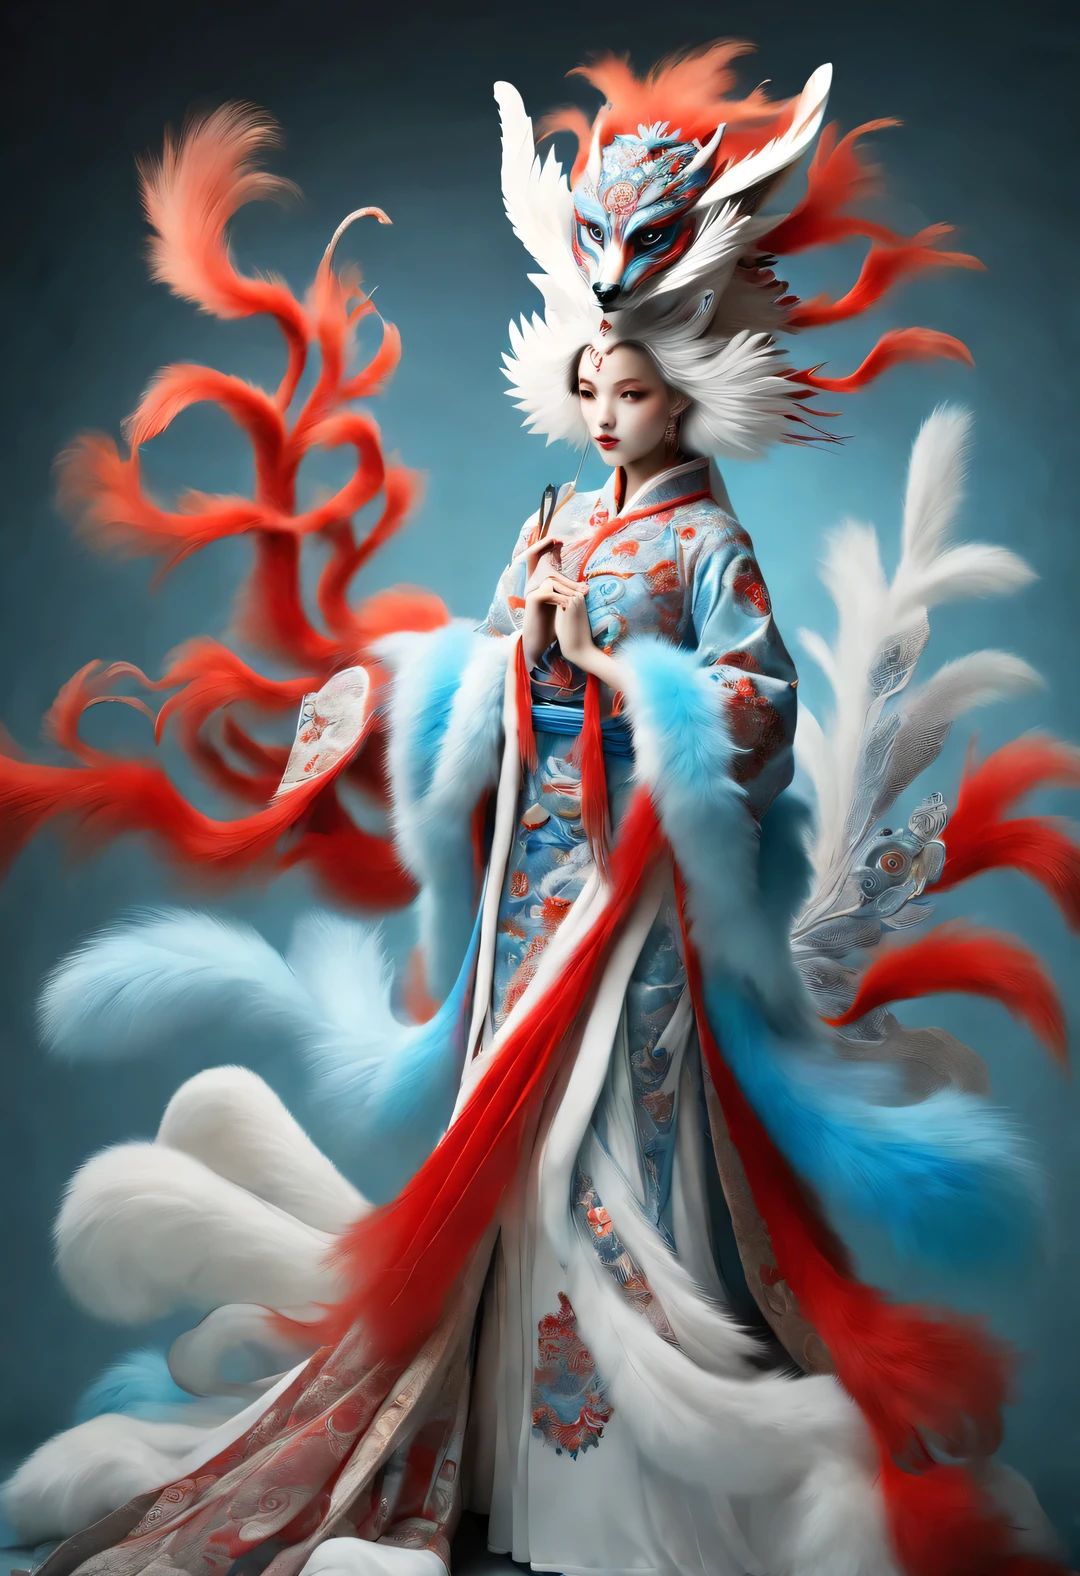 Zbrush style red and blue fashion painting, Oriental style, Soft realism and surreal details, blue and sky blue tones, (A white hair、blue eyes、Fox with nine red tails), Lots of fluffy red tails wrapped around, Ancient Chinese mythical beasts, fantasy,